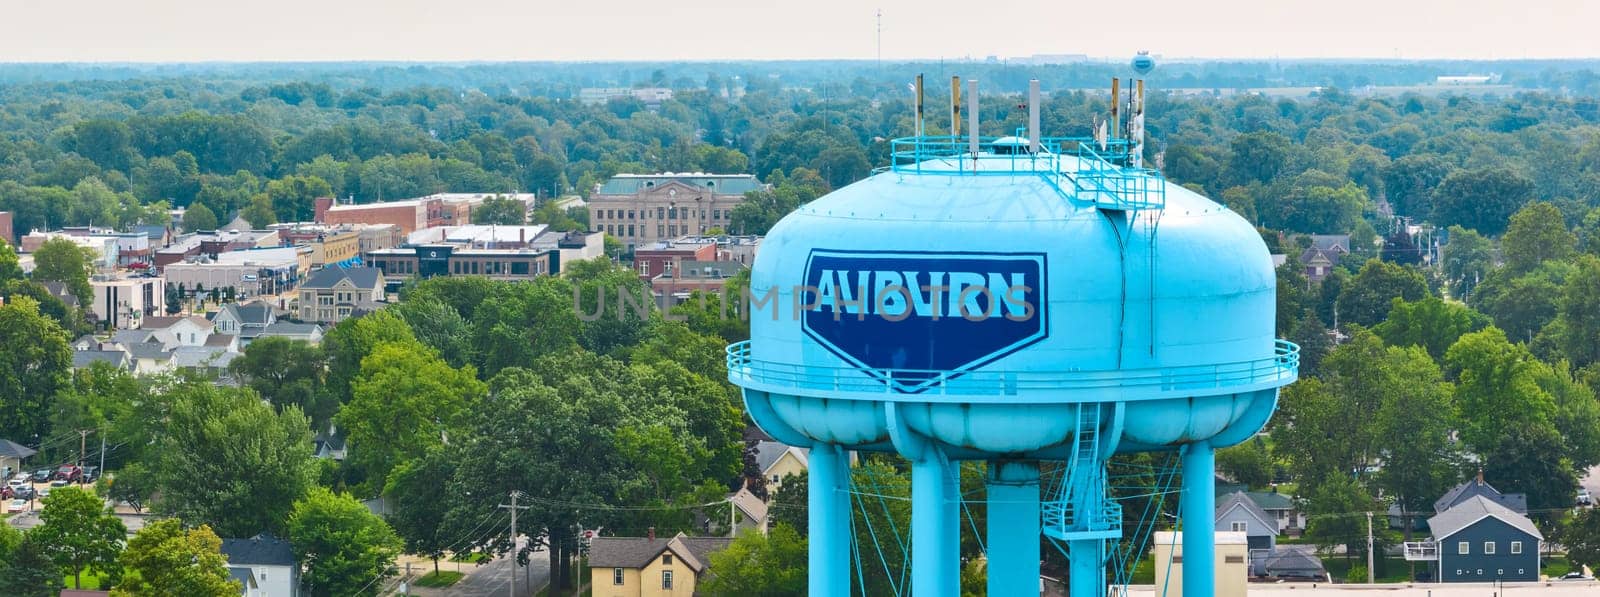 Wide panoramic view of Auburn downtown with focus on bright blue water tower aerial by njproductions